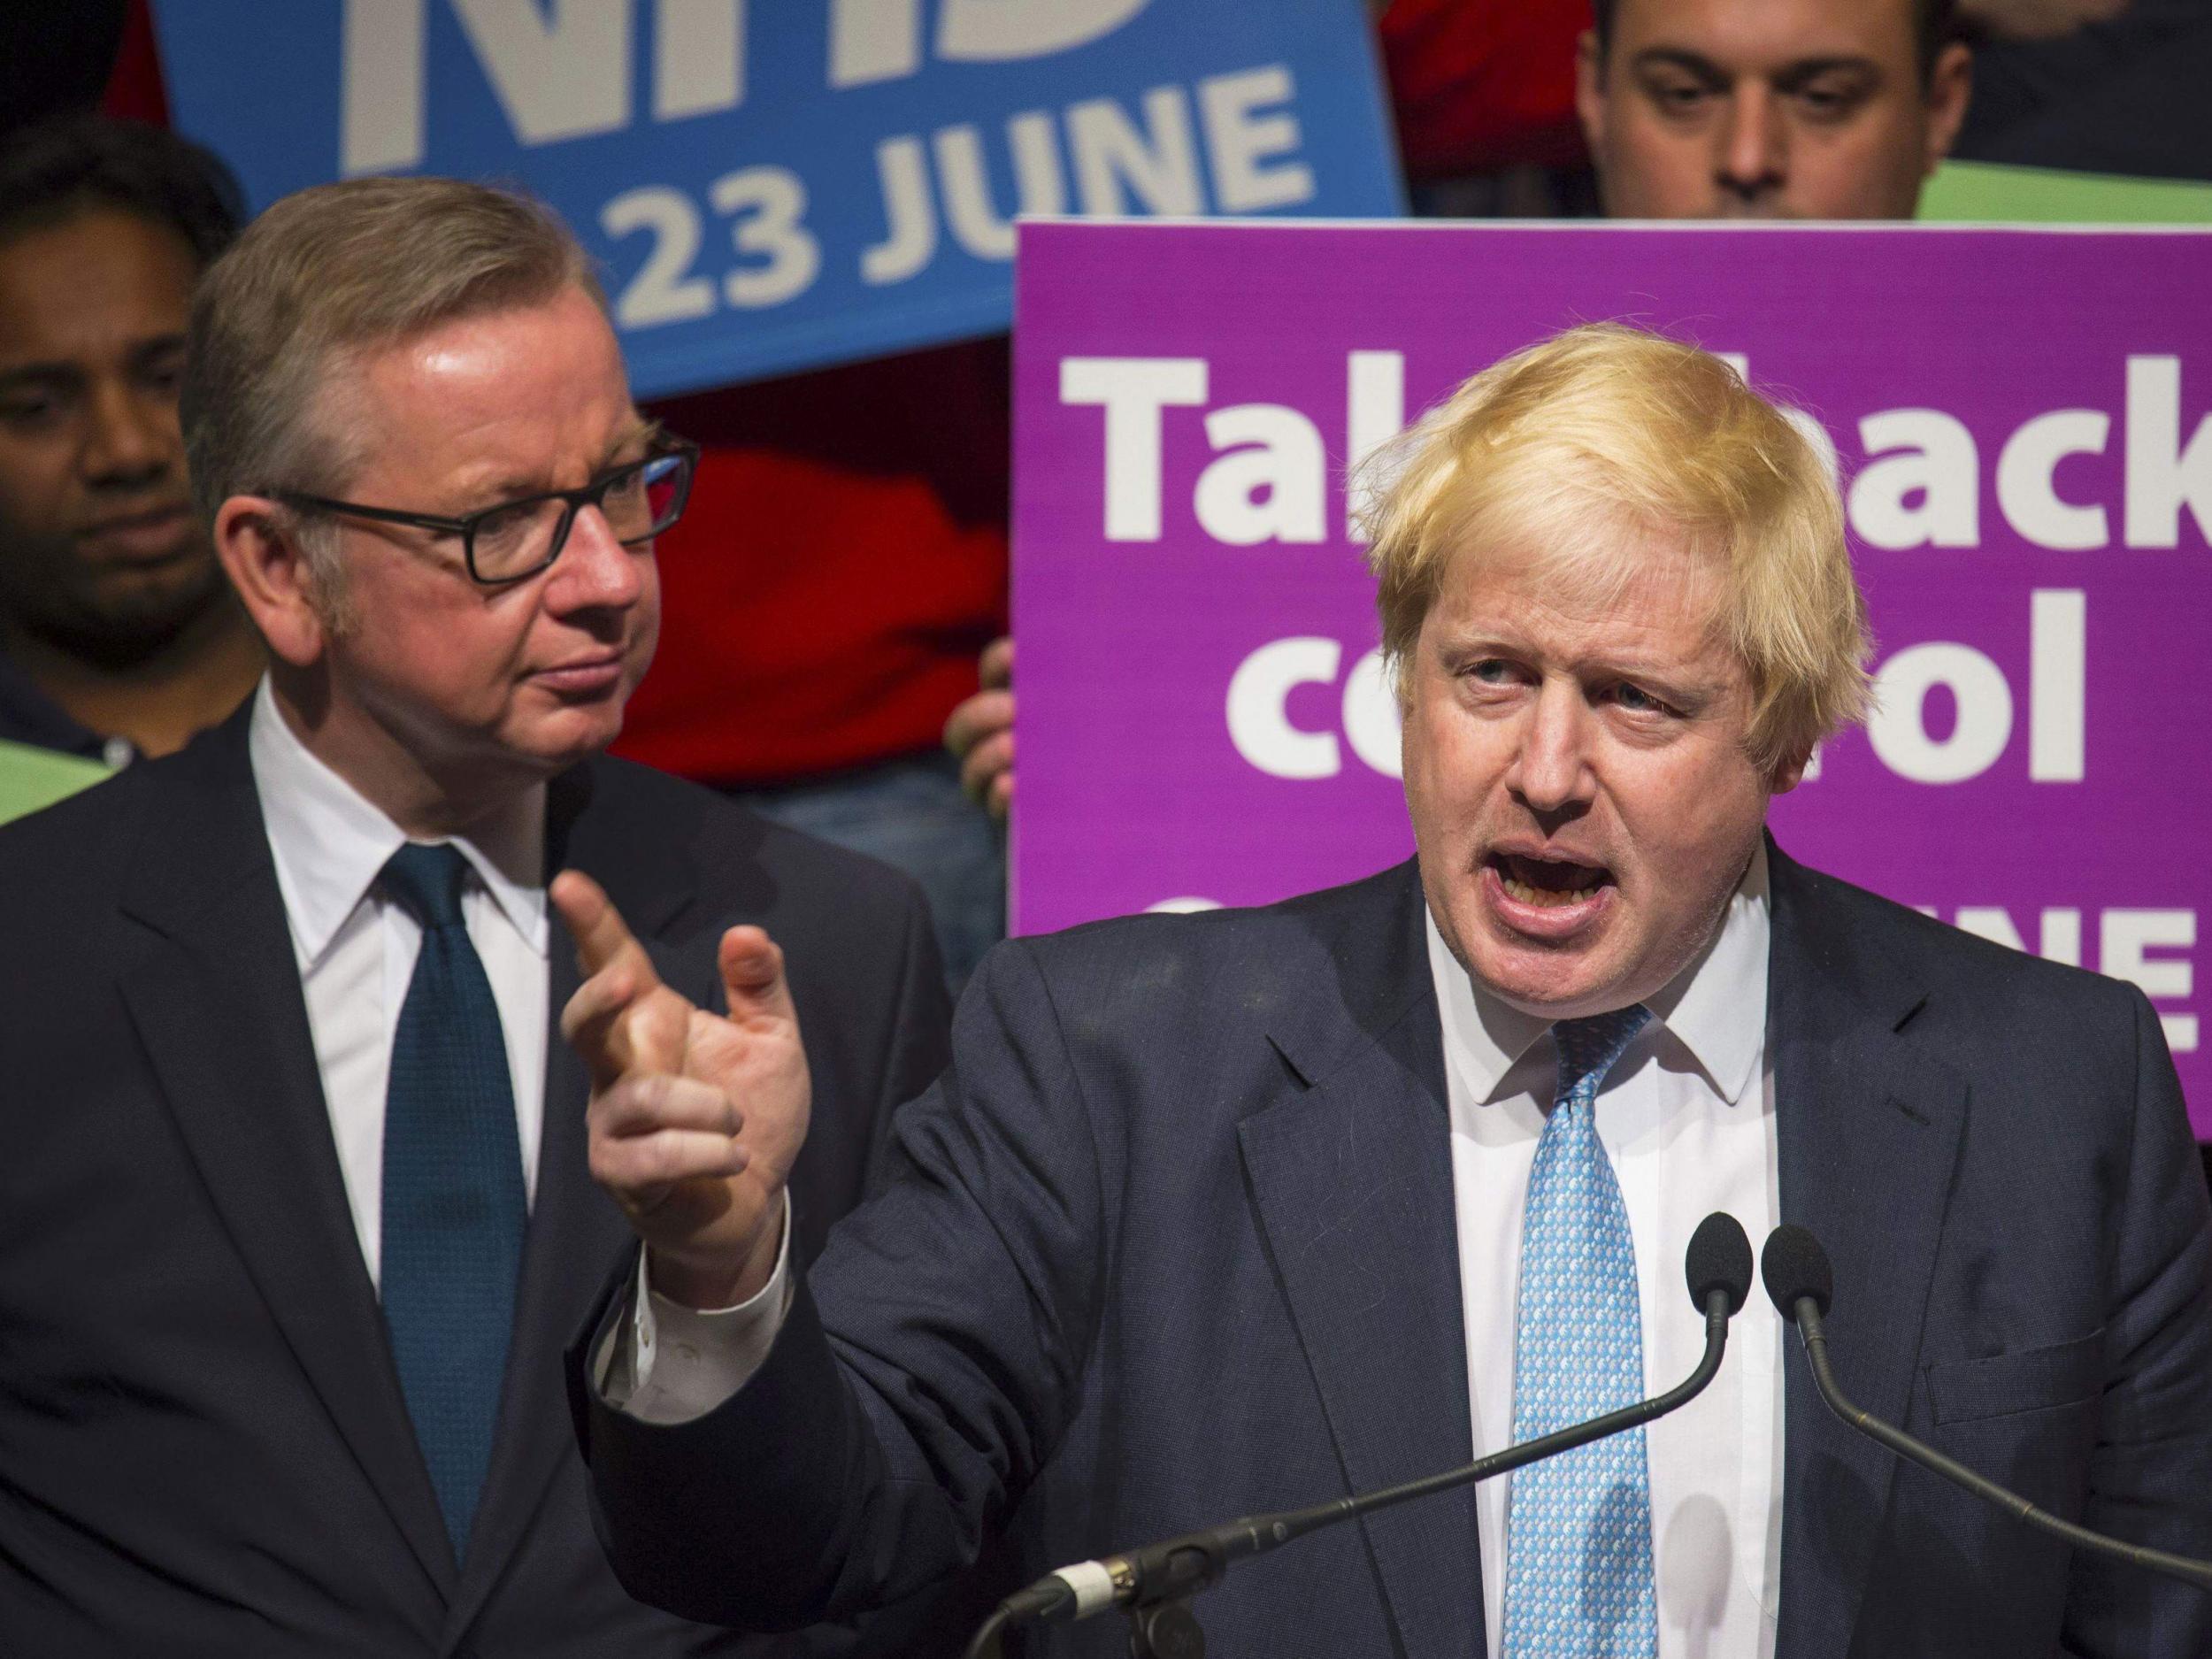 Assertions from Michael Gove and Boris Johnson that Britain would be wealthier outside the EU have been rubbished